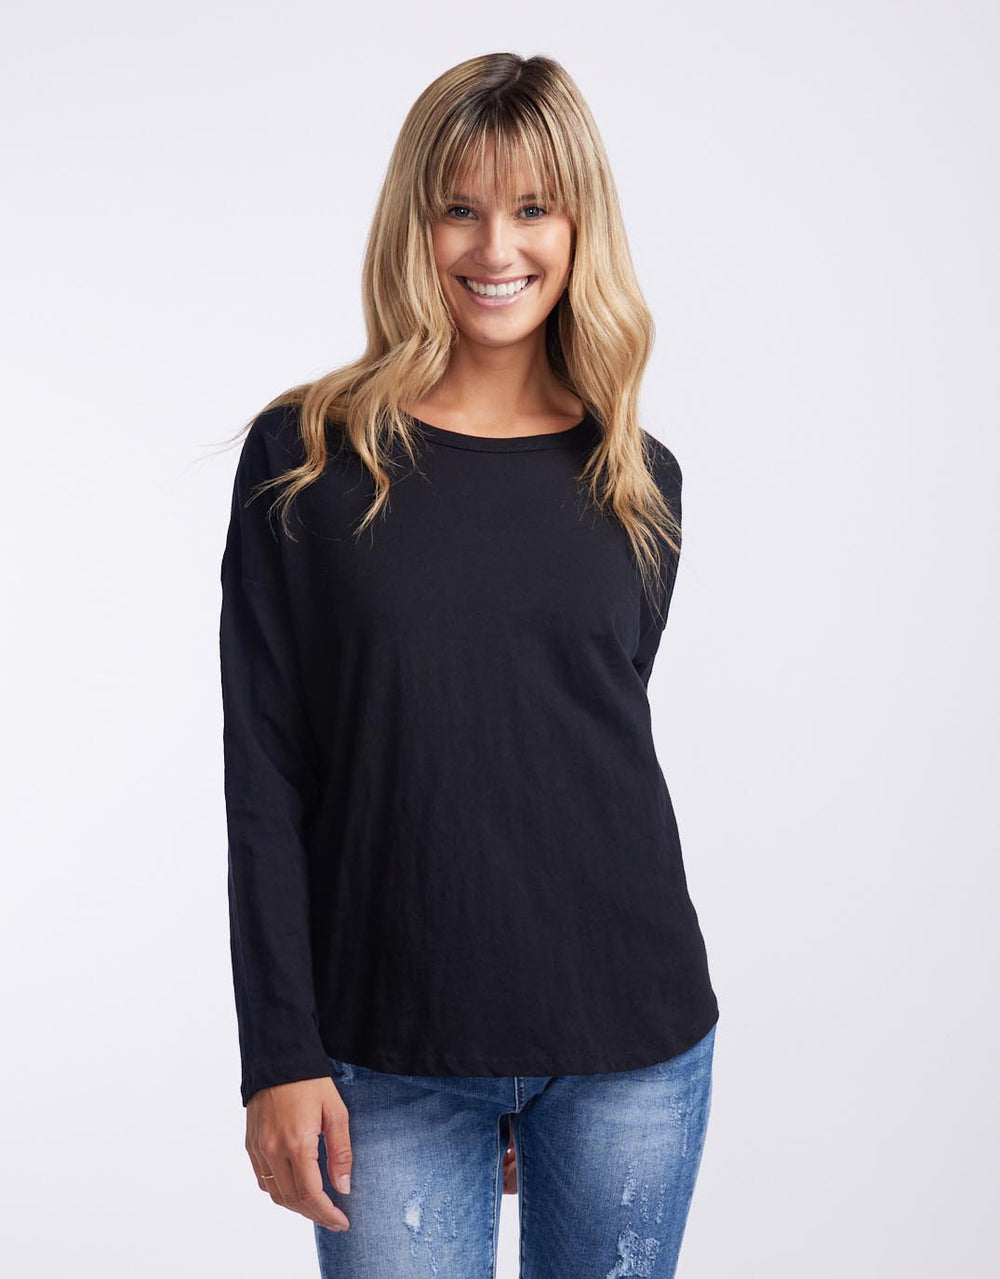 white-co-original-relaxed-long-sleeve-tee-black-womens-clothing